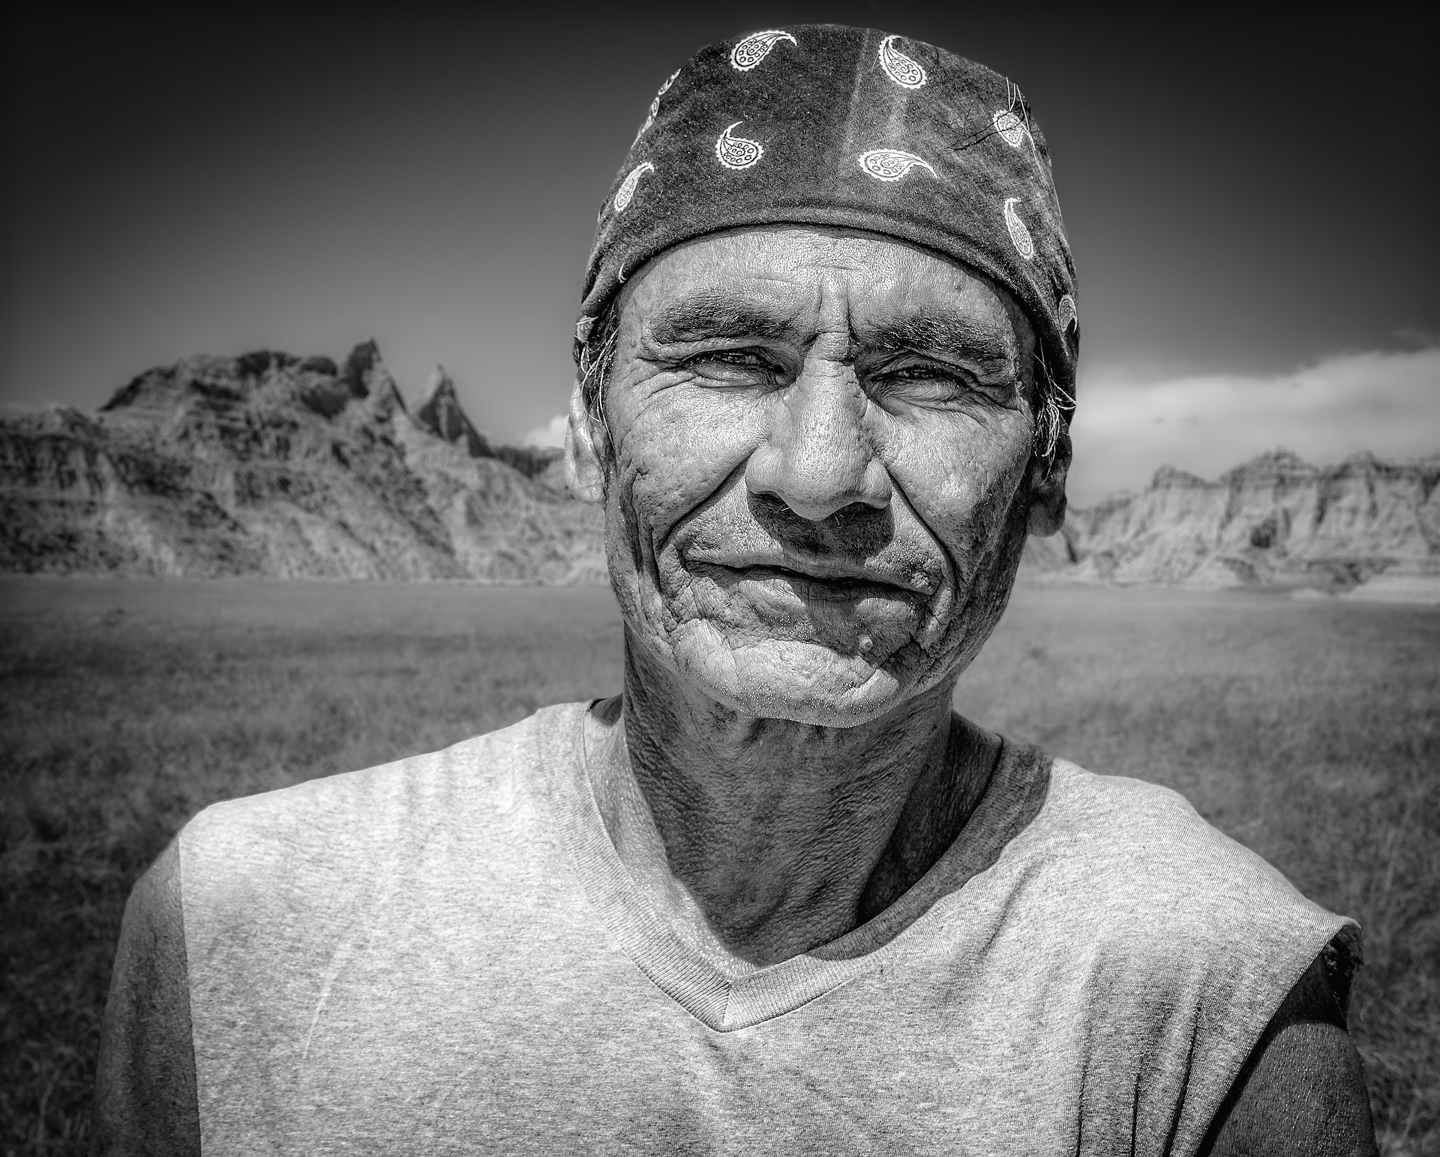 2nd PrizeOpen Mono In Class 3 By Warren Bouton For A Hard Life In The Badlands MAR-2022.jpg